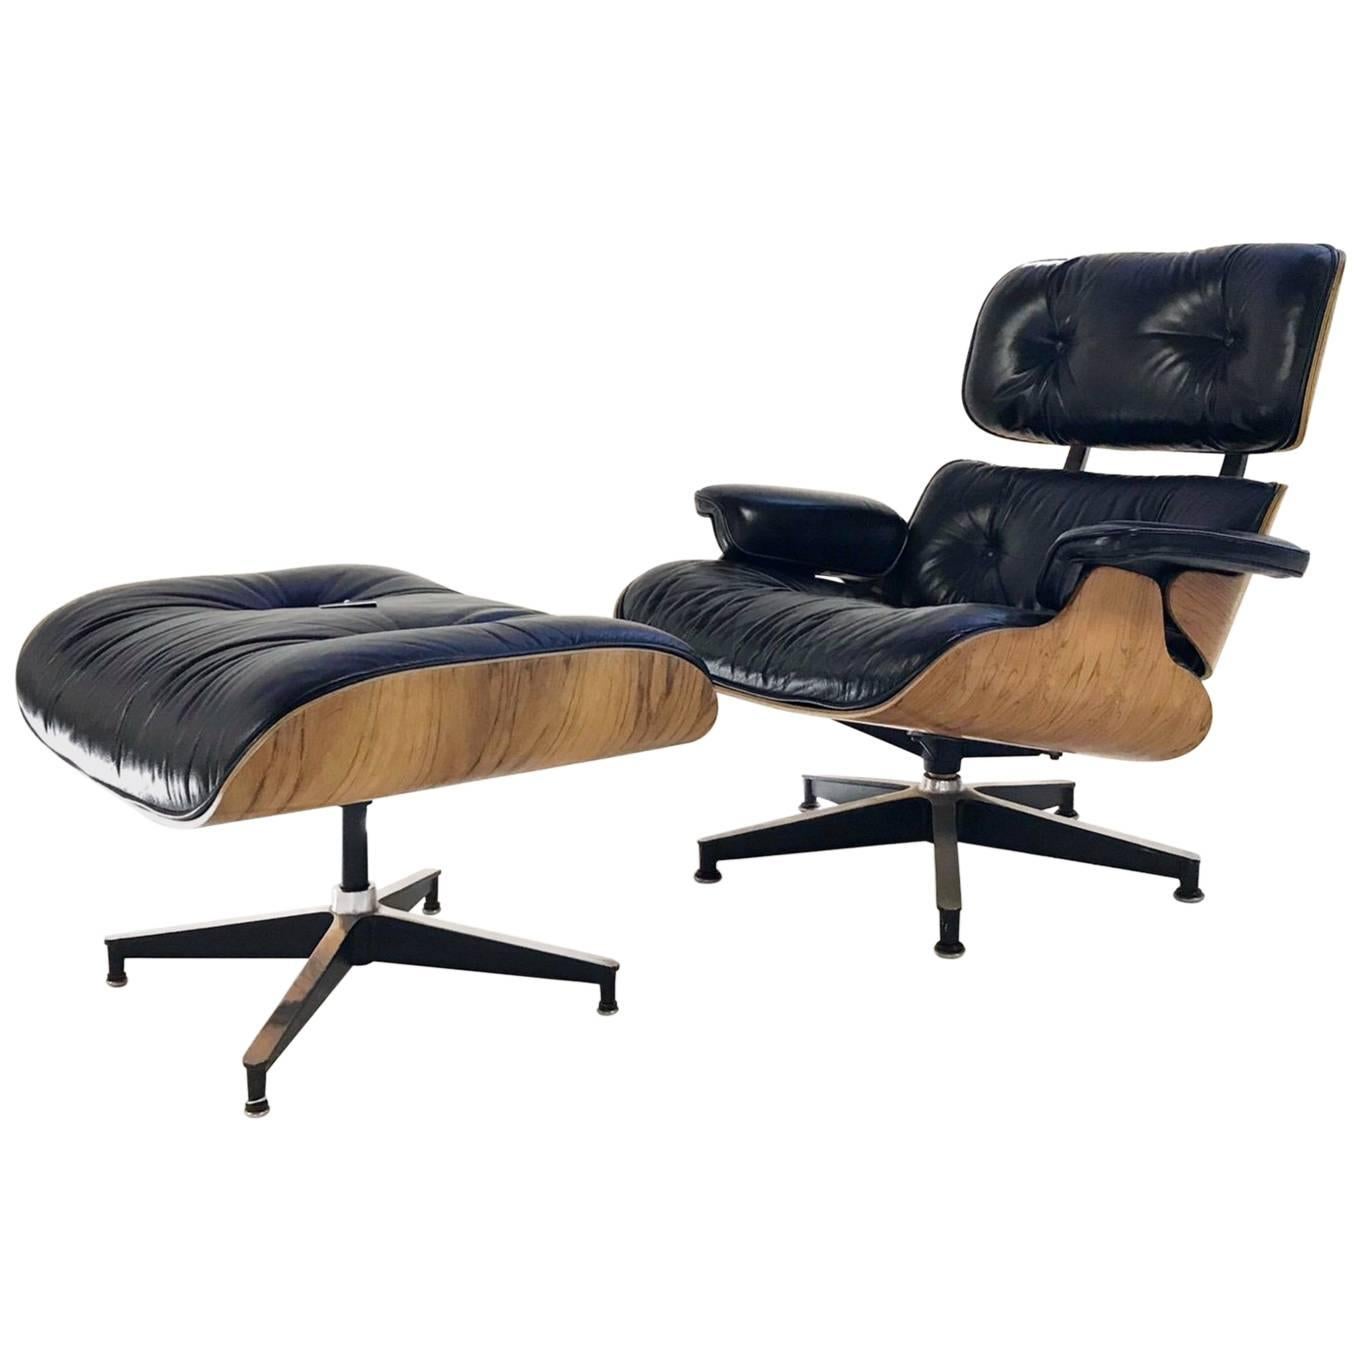 Charles and Ray Eames for Herman Miller 670 Lounge Chair and 671 Ottoman